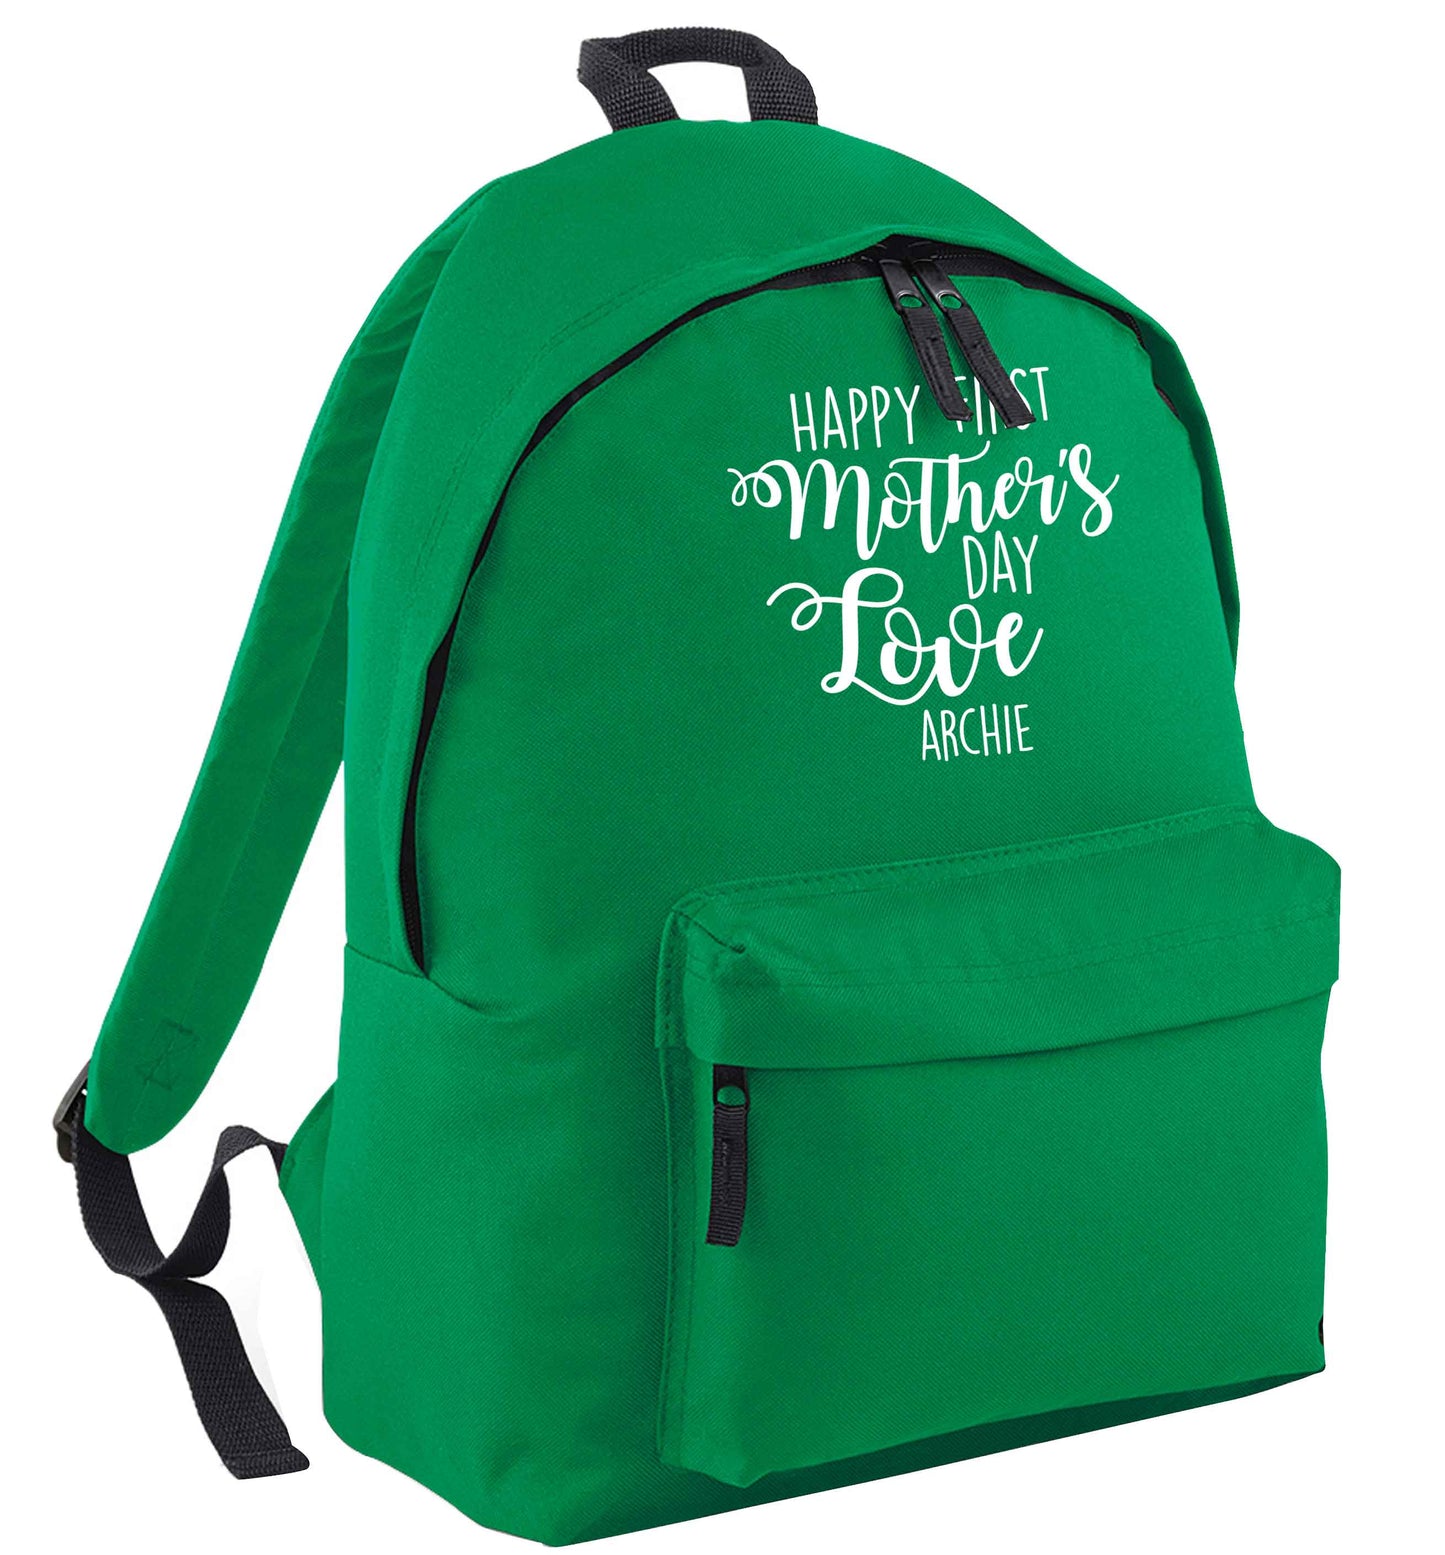 Mummy's first mother's day! green adults backpack